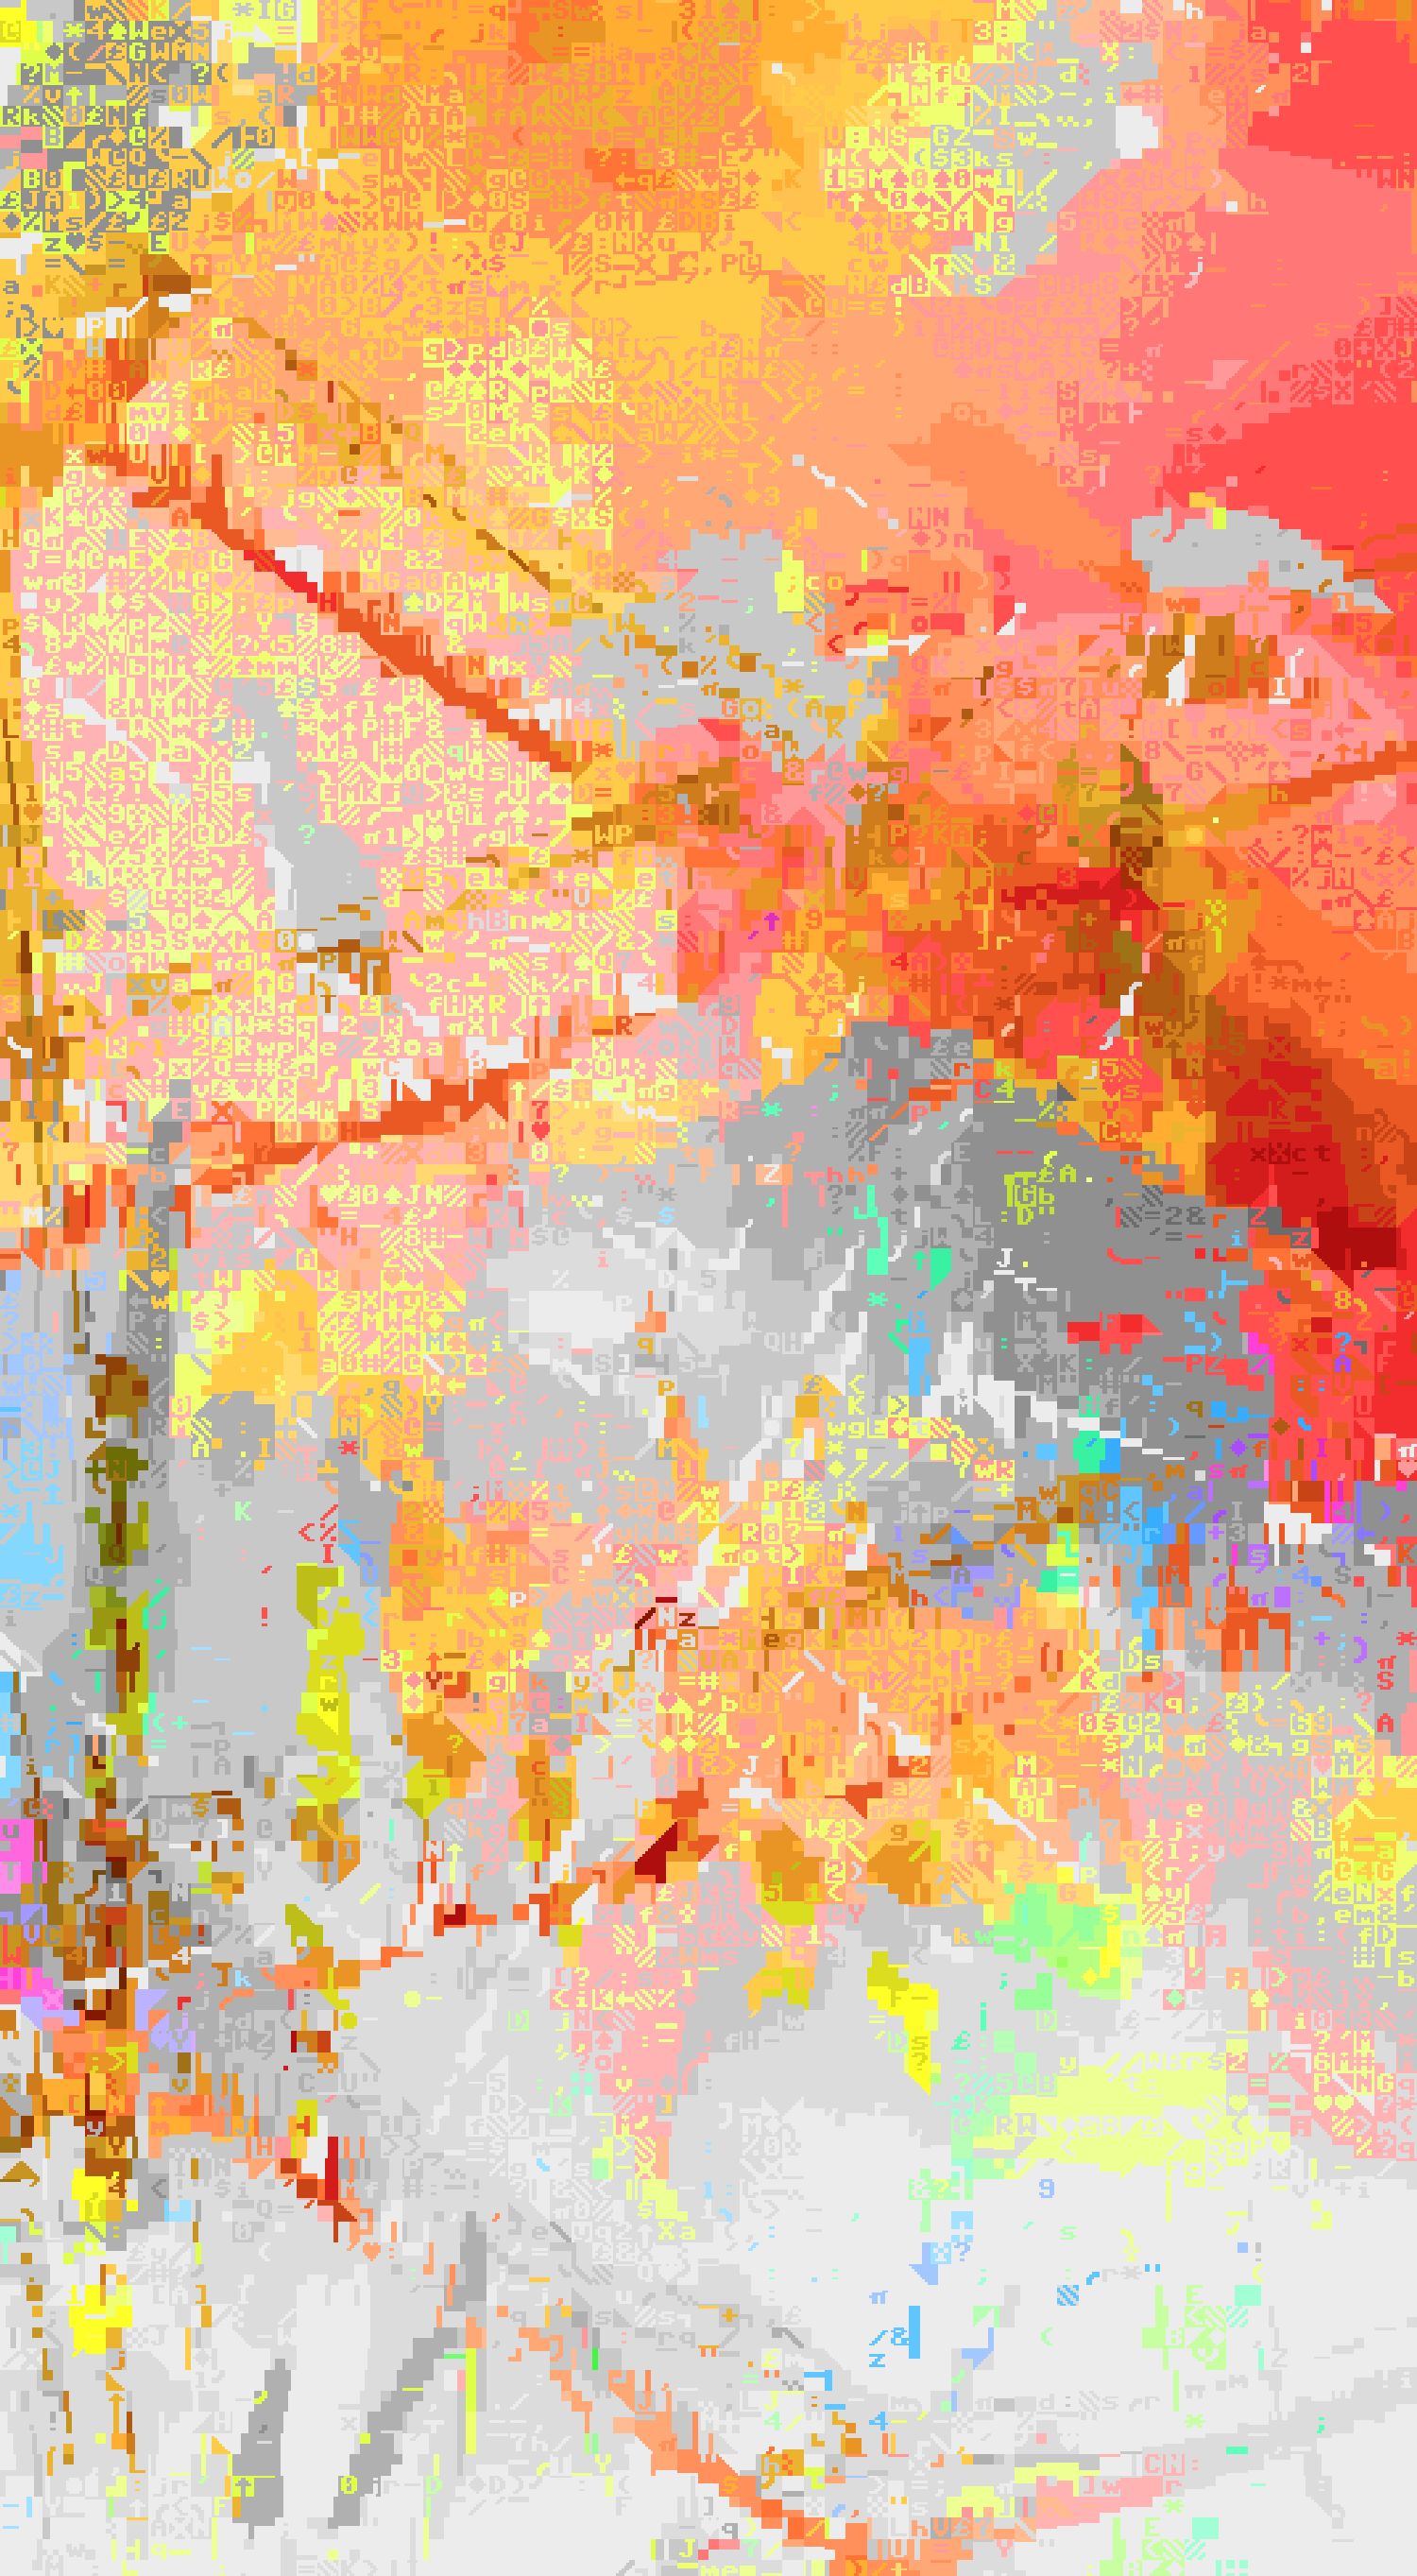 glitch art made with text characters. A collision of the great sky columns.